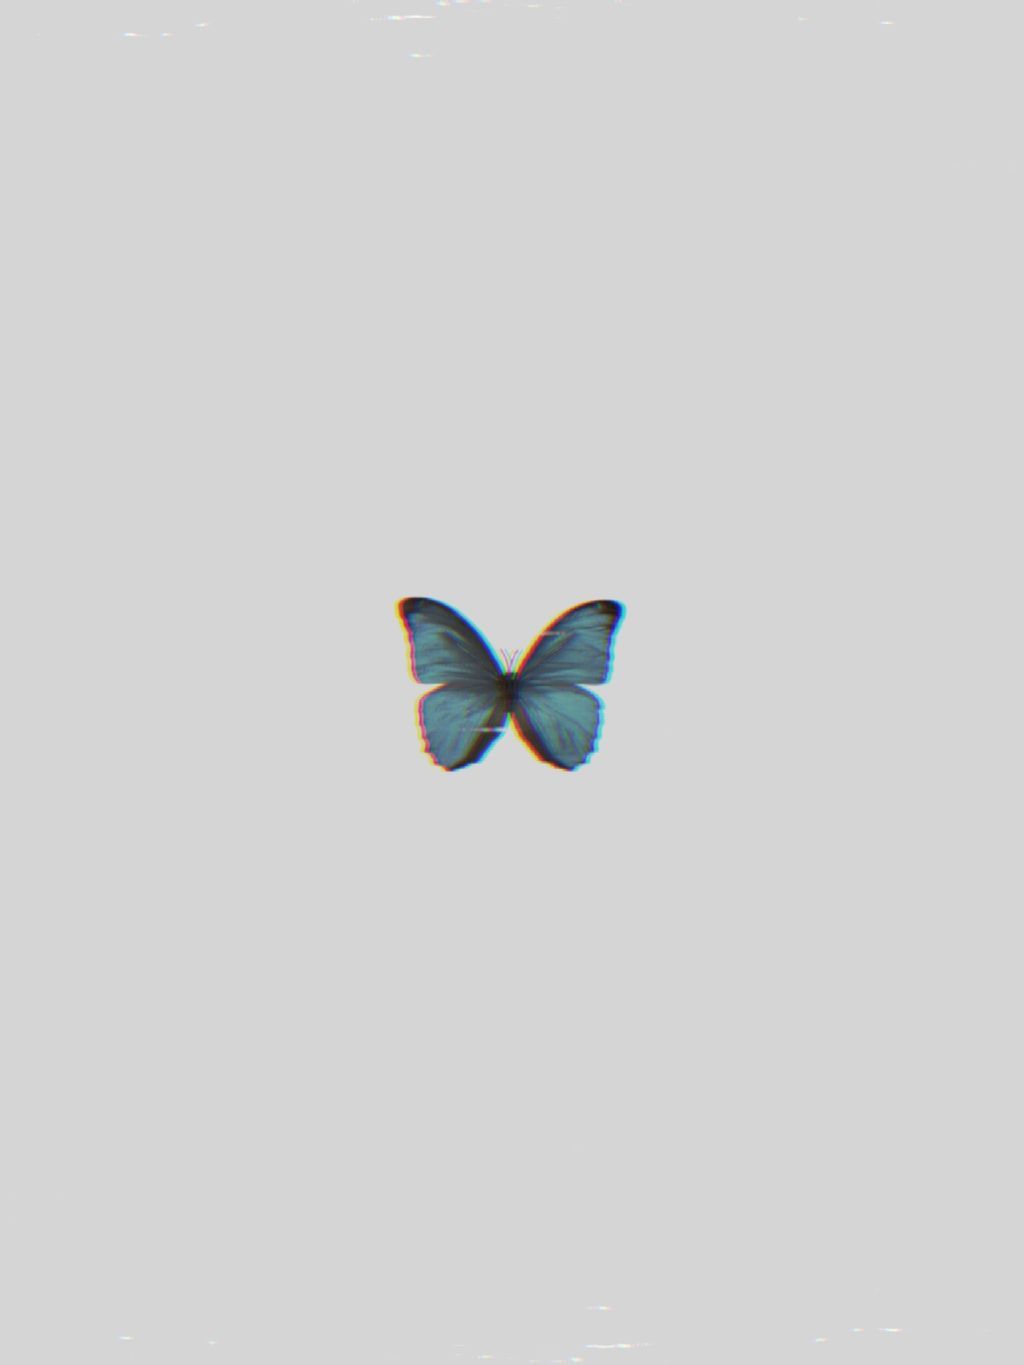 Aesthetic Blue Butterfly Wallpapers - Wallpaper Cave